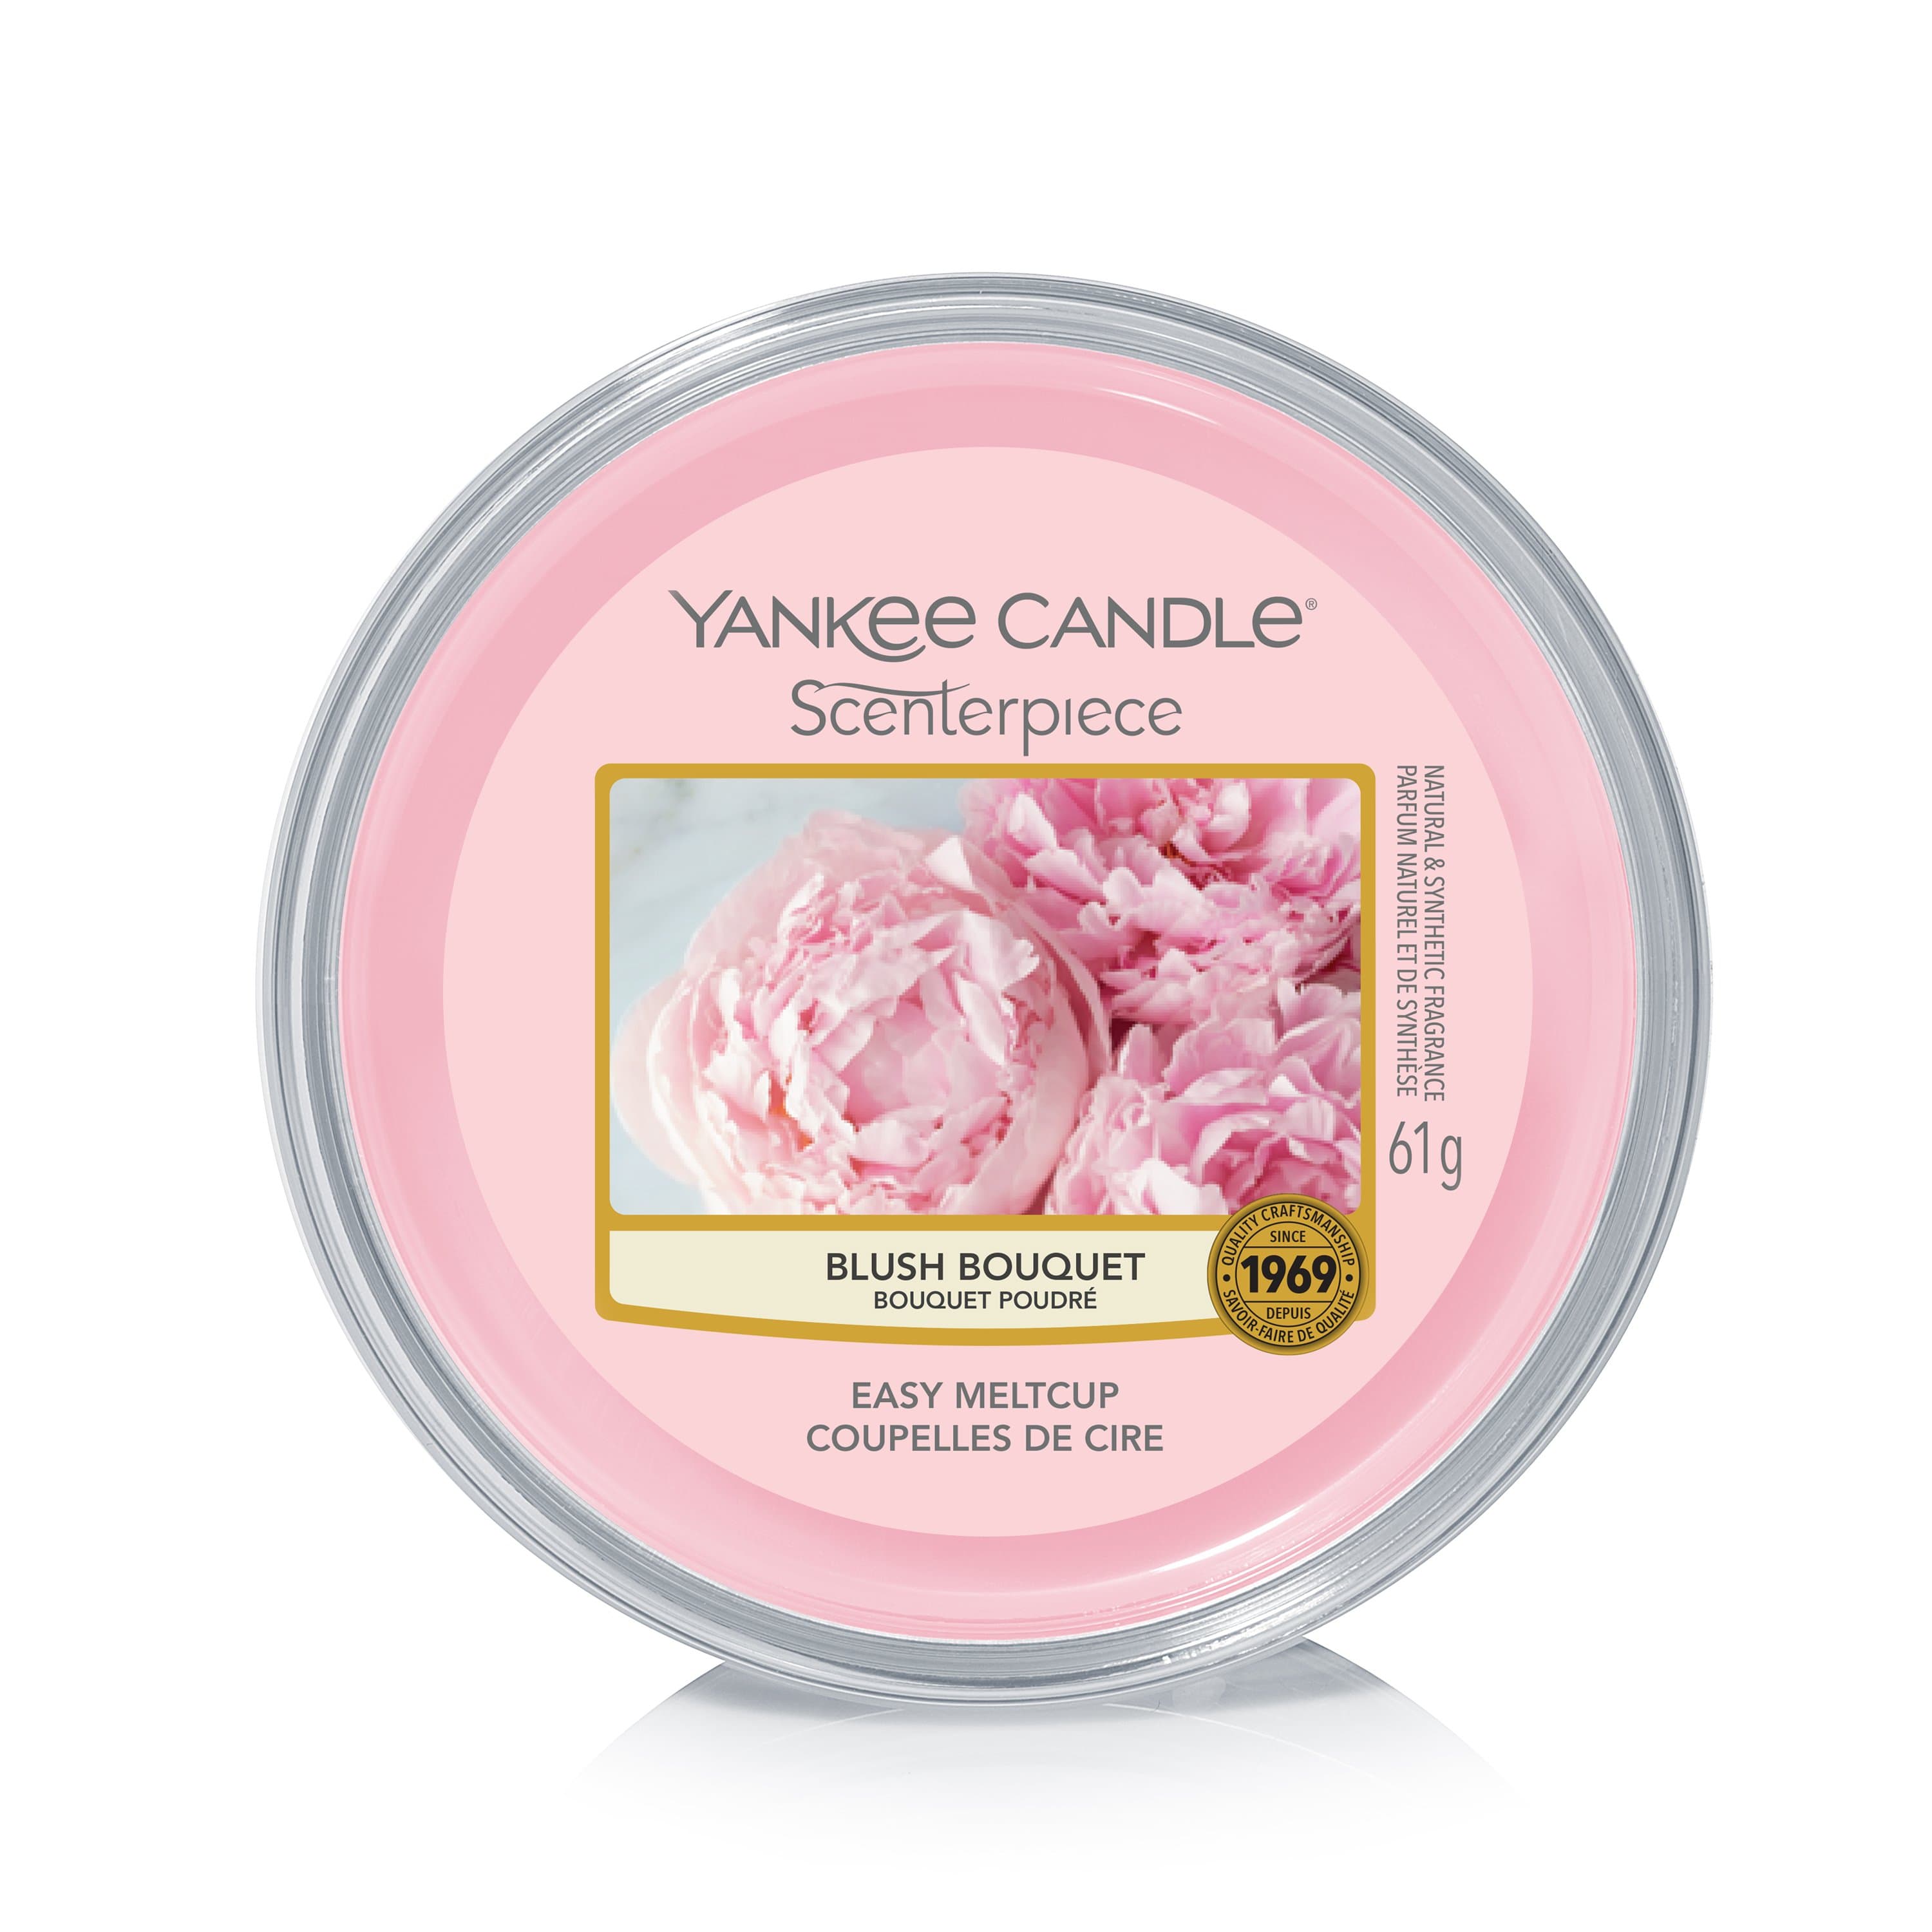 Yankee Candle Melt Cup Yankee Candle Scenterpiece Melt Cup - Blush Bouquet